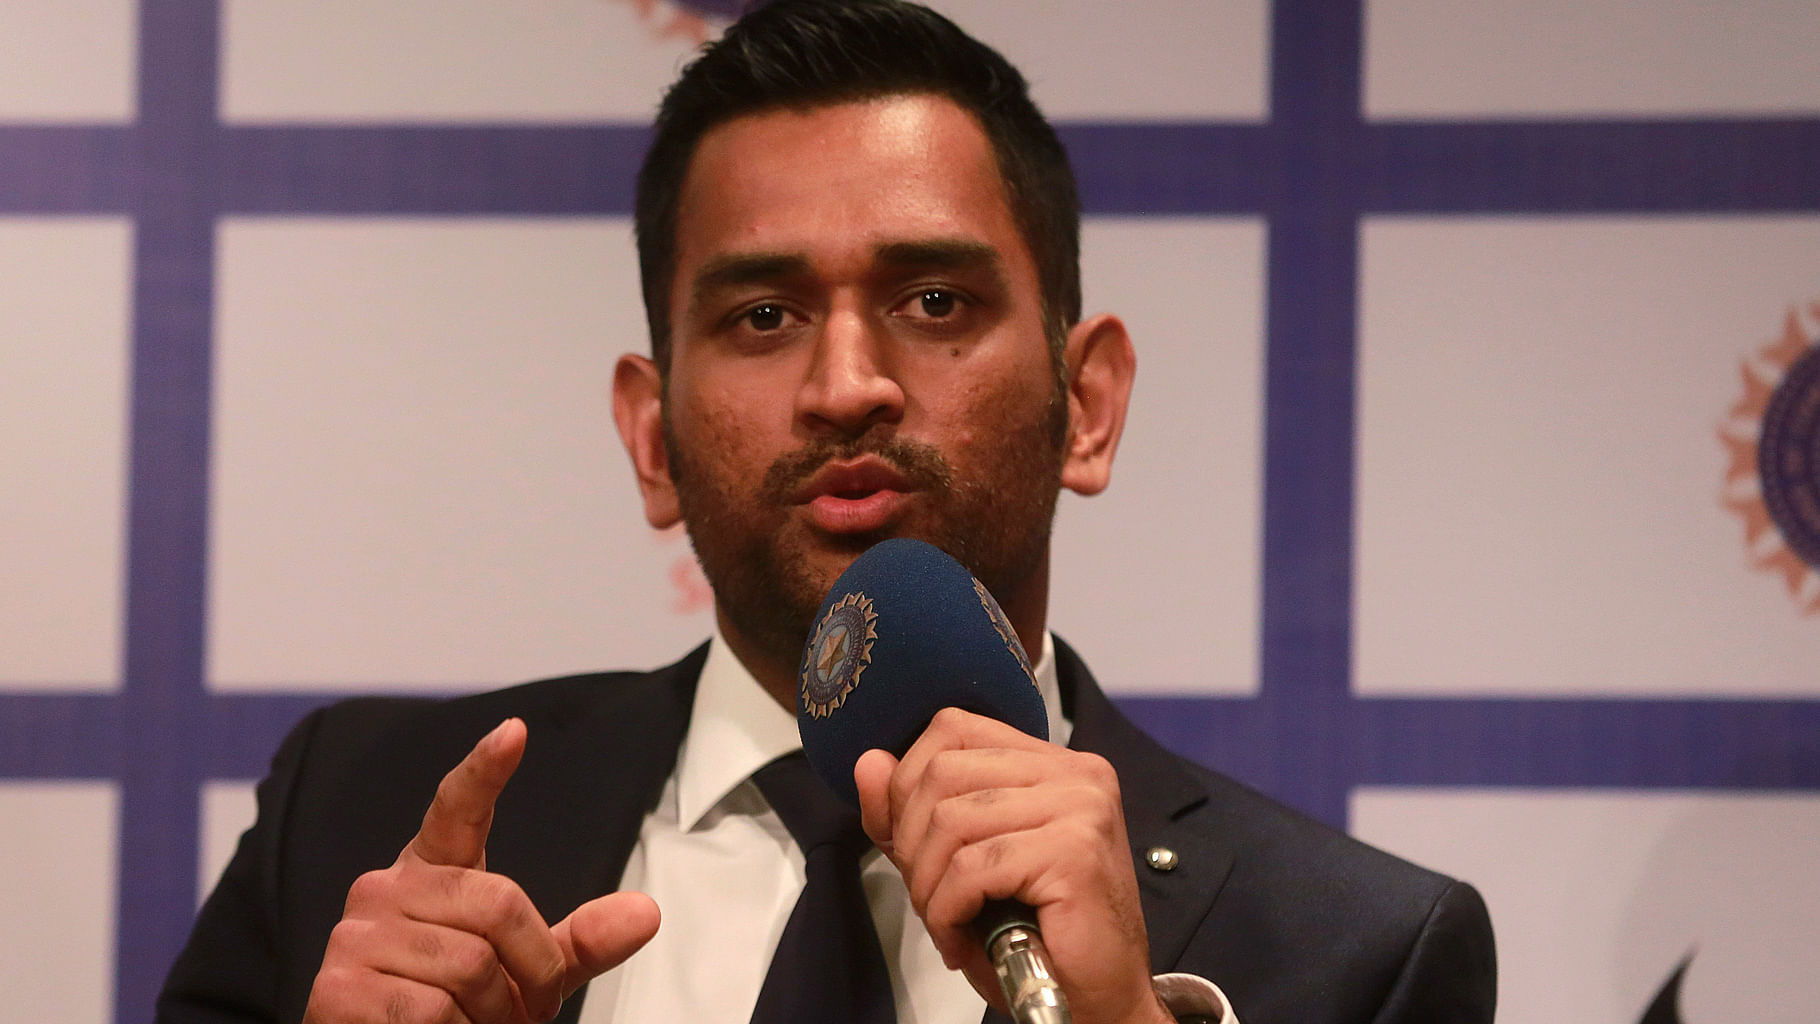 India’s captain Mahendra Singh Dhoni speaks during a press conference ahead of the team’s departure for the limited-overs cricket tour of Australia, in Mumbai. (Photo: AP)